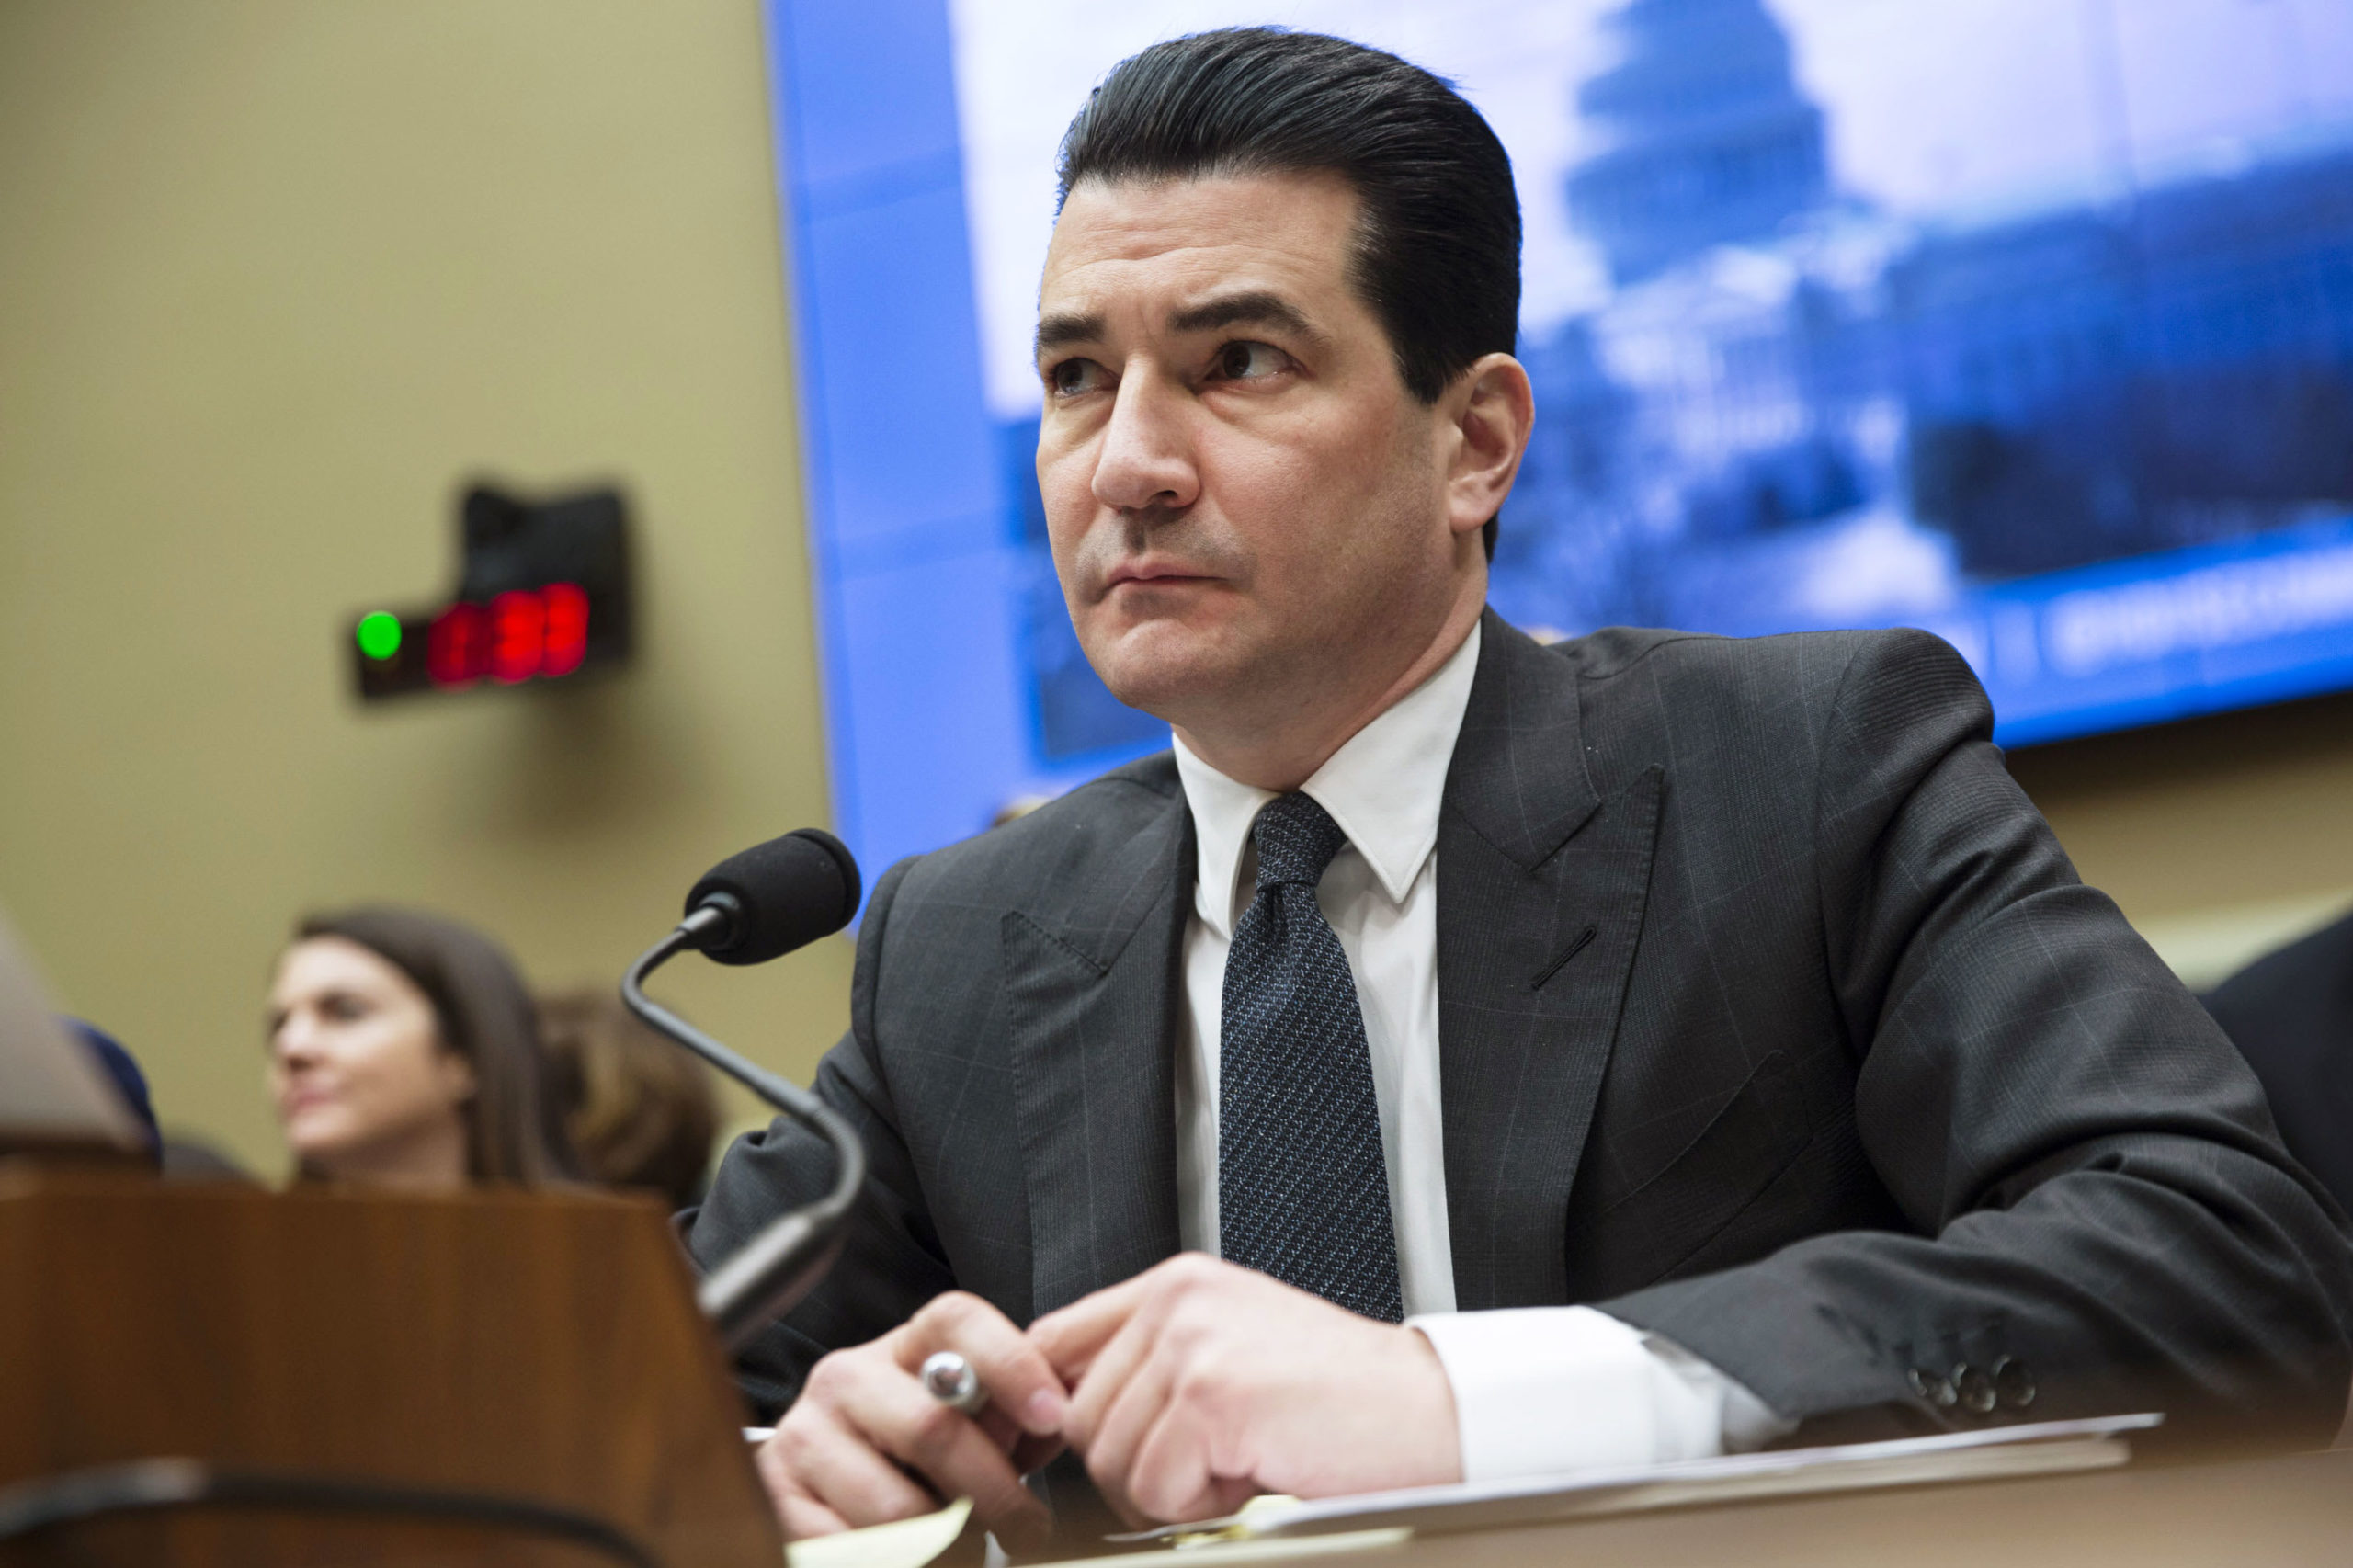 Dr. Scott Gottlieb says he thinks the worst of the U.S. coronavirus epidemic ‘will probably be over by January’